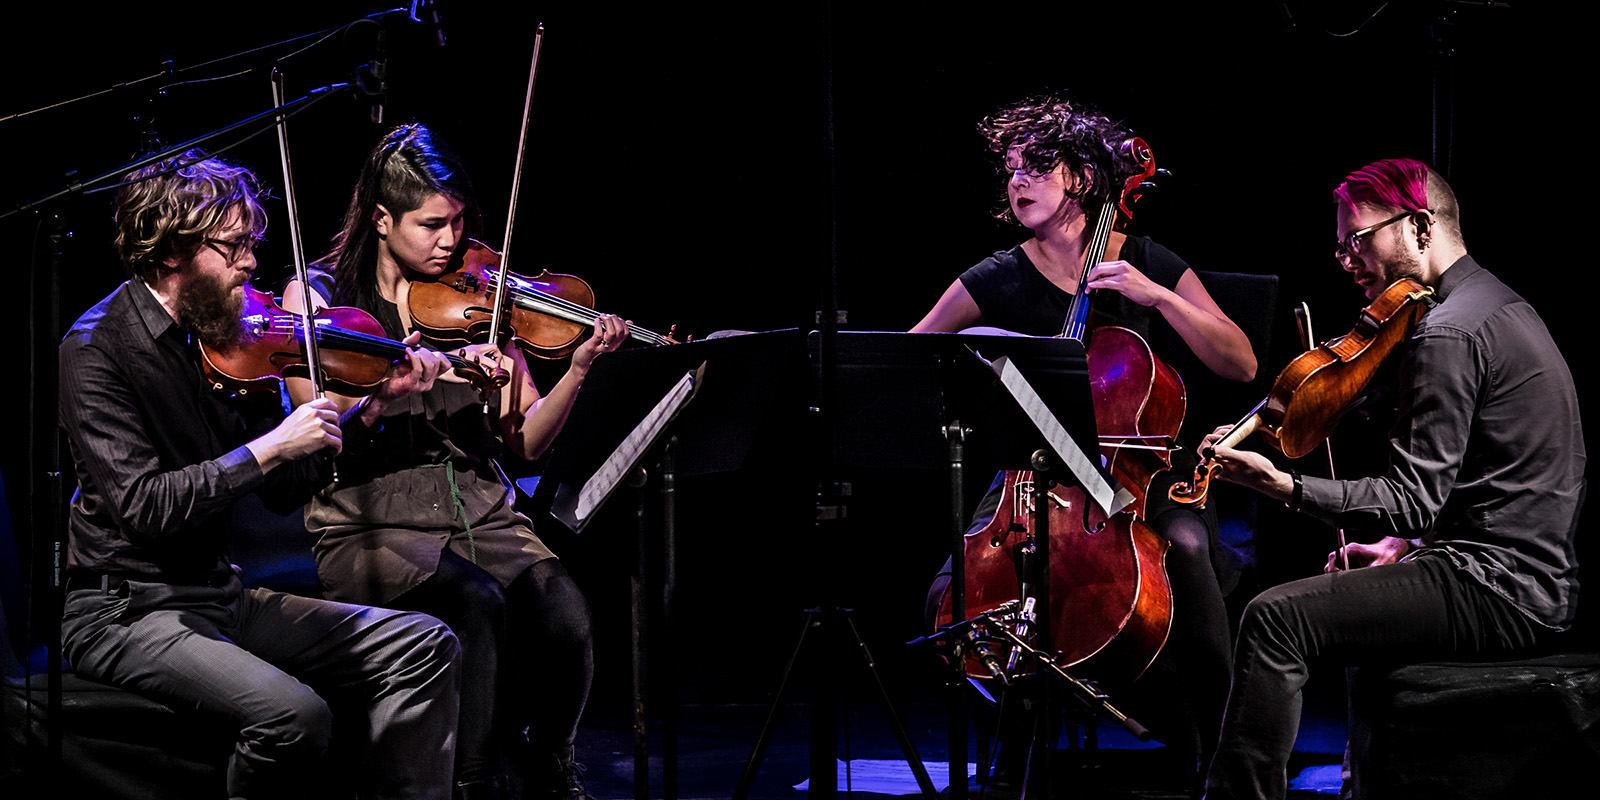 Four musicians in black clothing play string instruments, including violins, viola, and cello, on a dark stage.